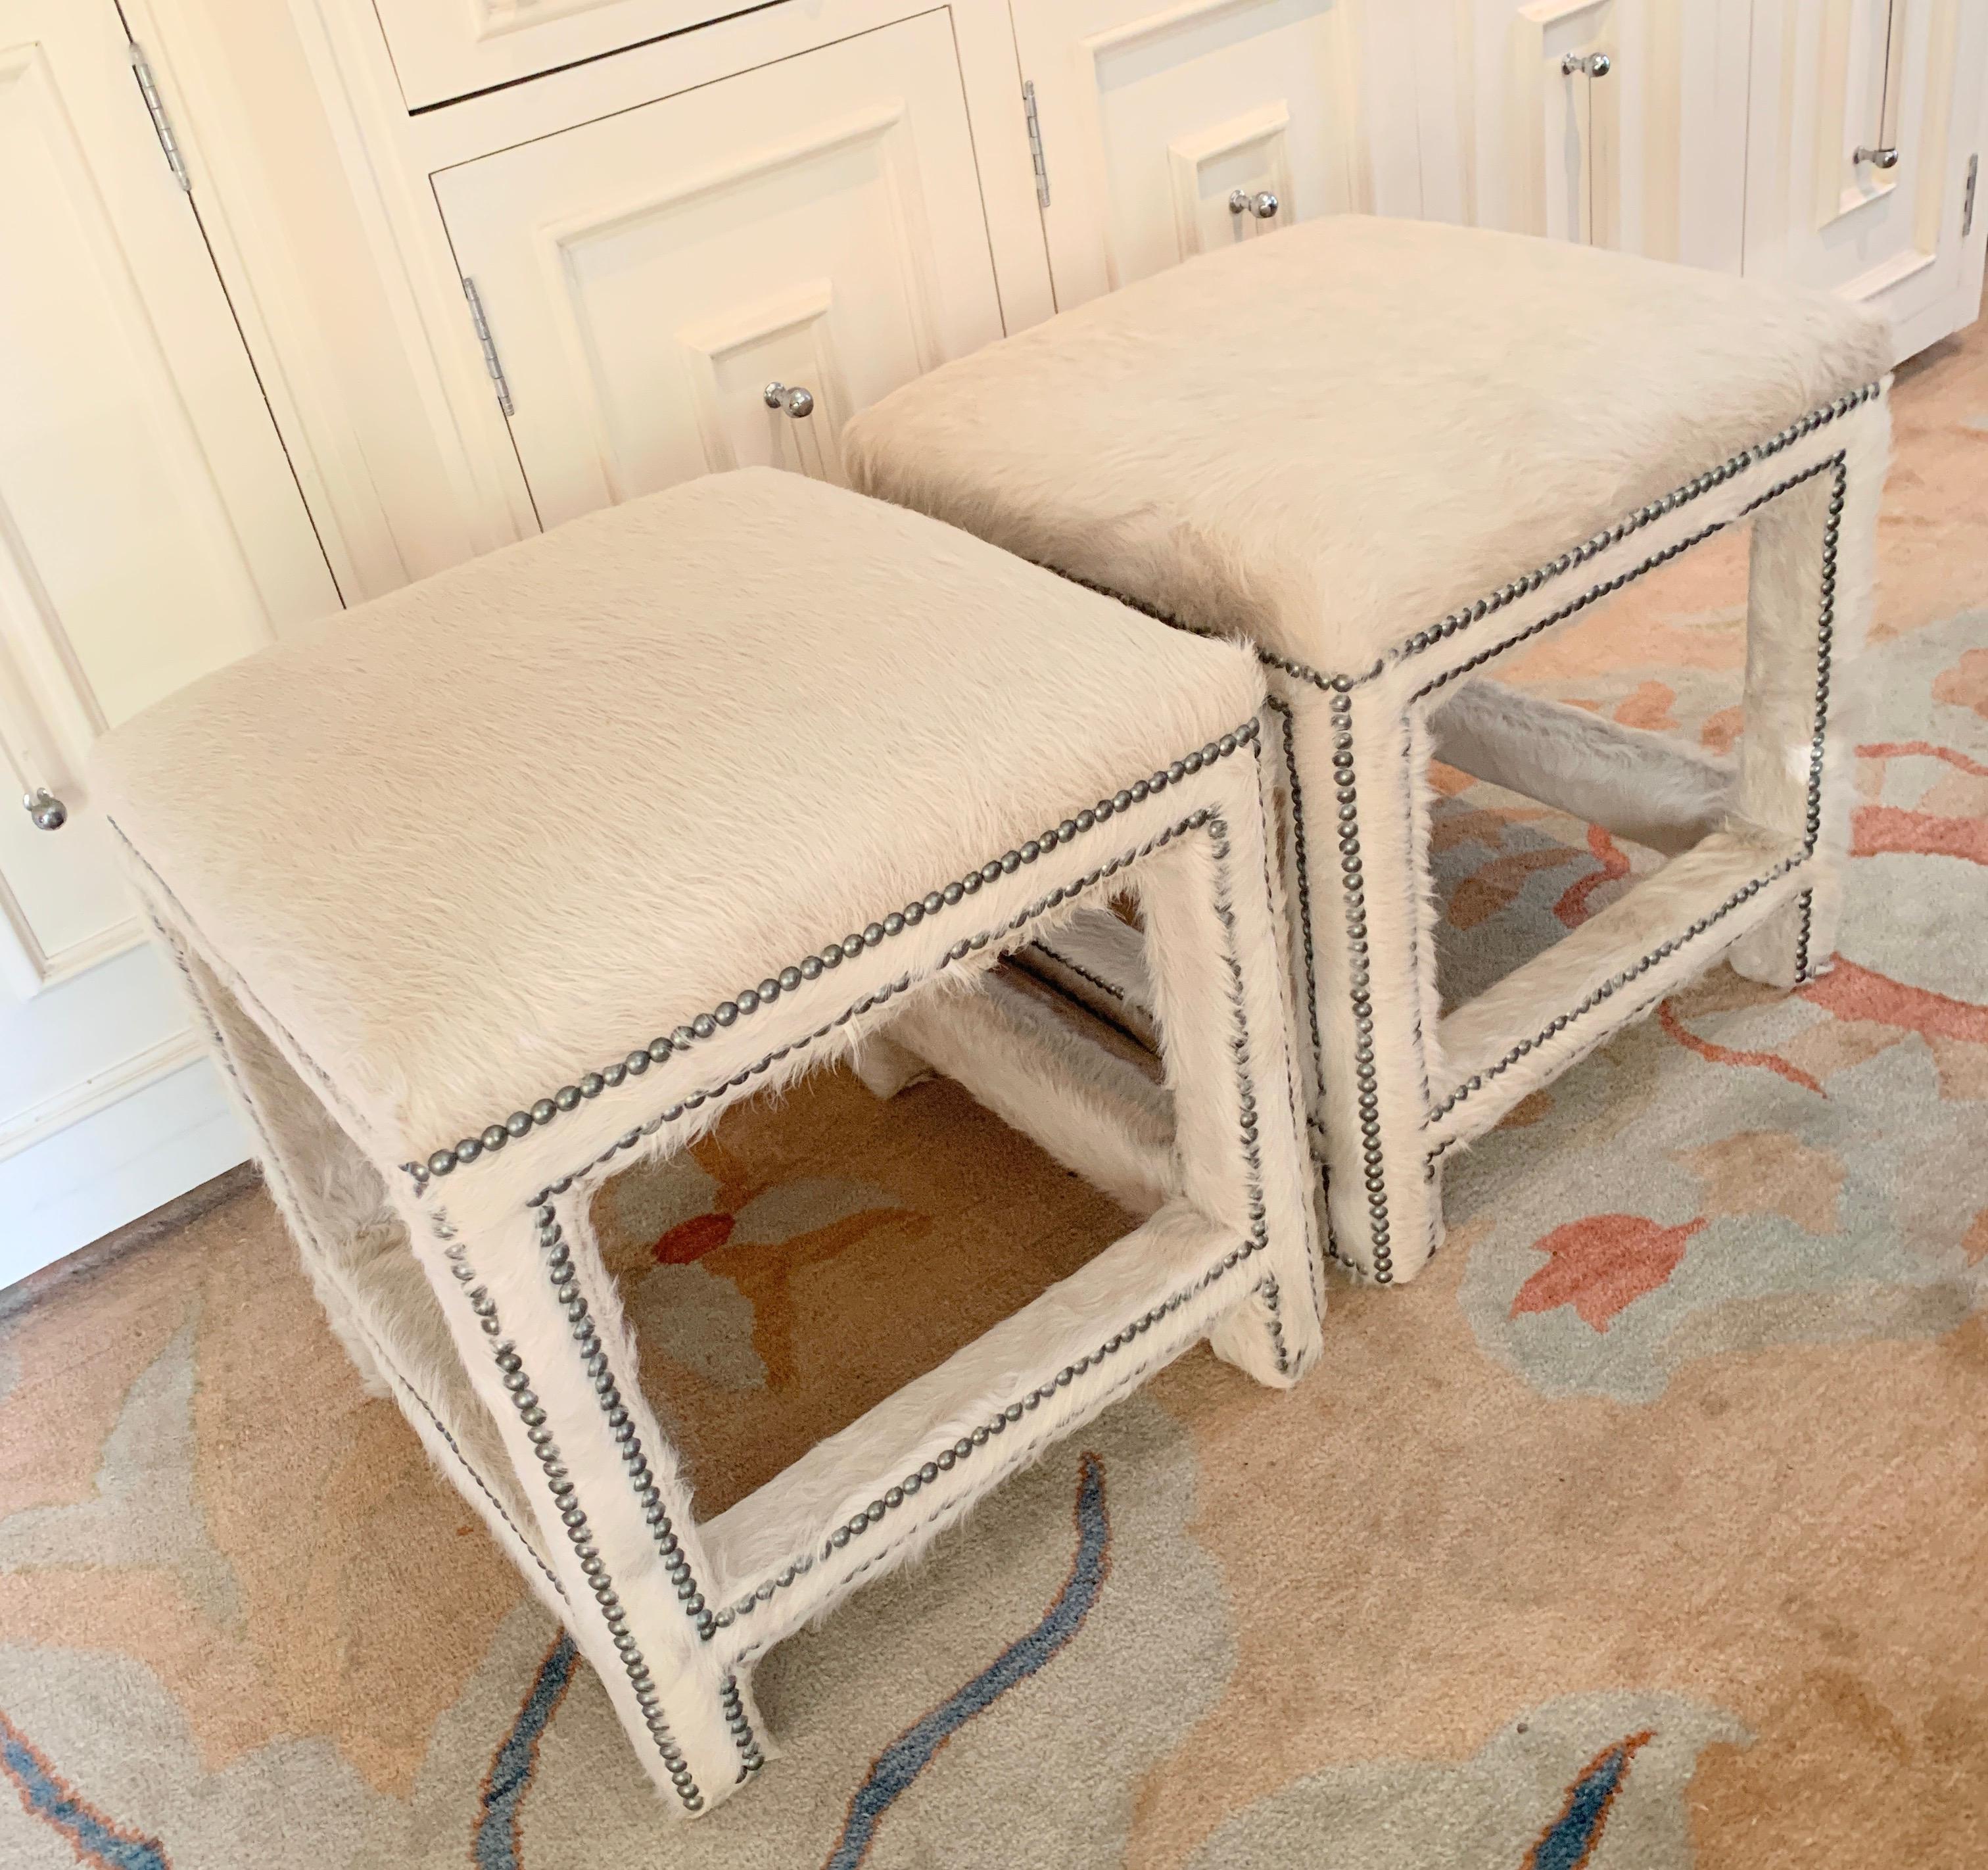 Pair of off- white pony skin benches, ottomans or stools -

The square wood frame benches are completely upholstered in off white pony skin / cow hide. Nail heads accents throughout give the benches a very clean and classic, yet modern look. A